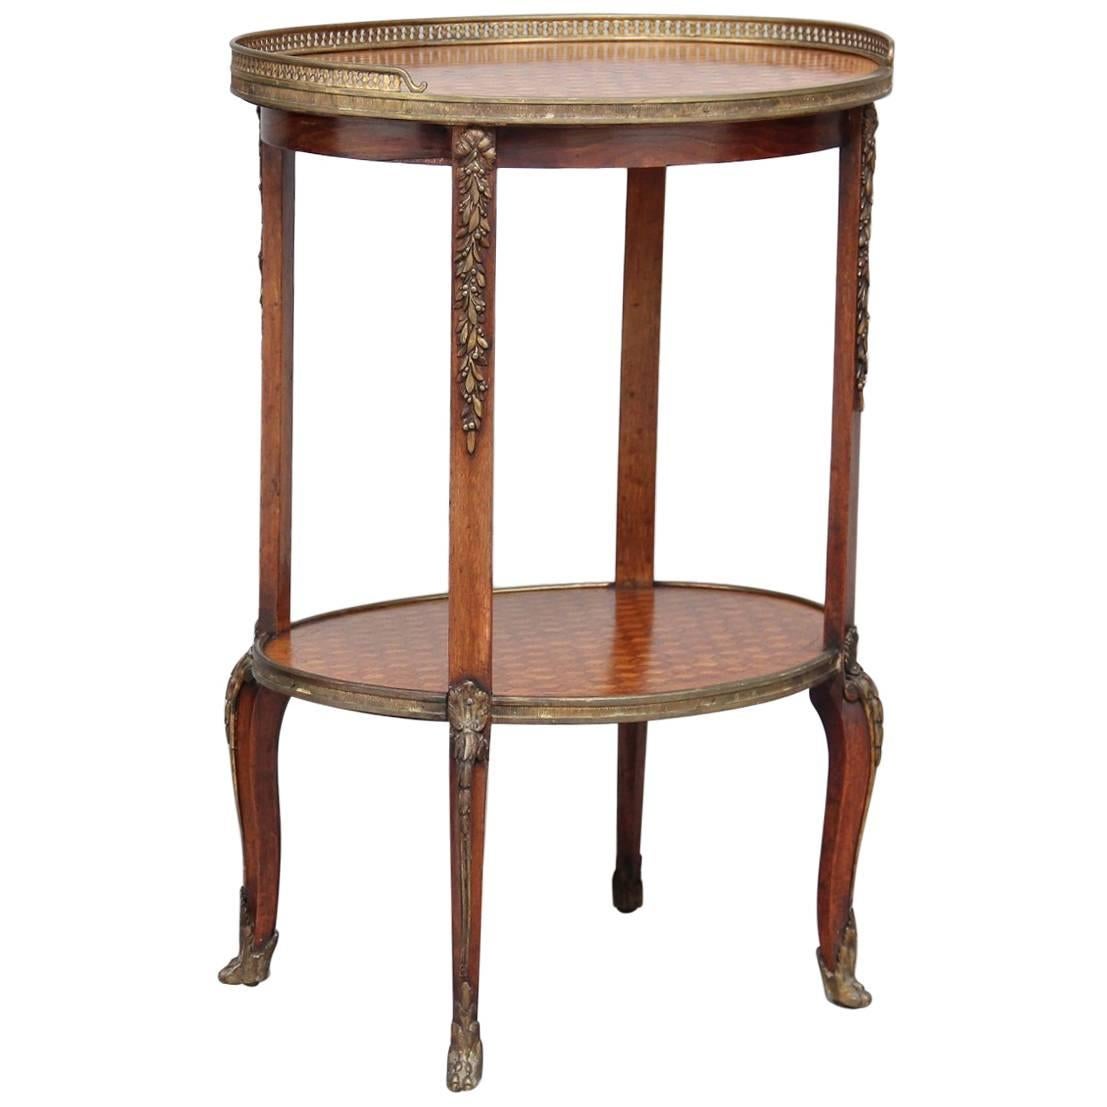 19th Century Kingwood and Parquetry Etagere